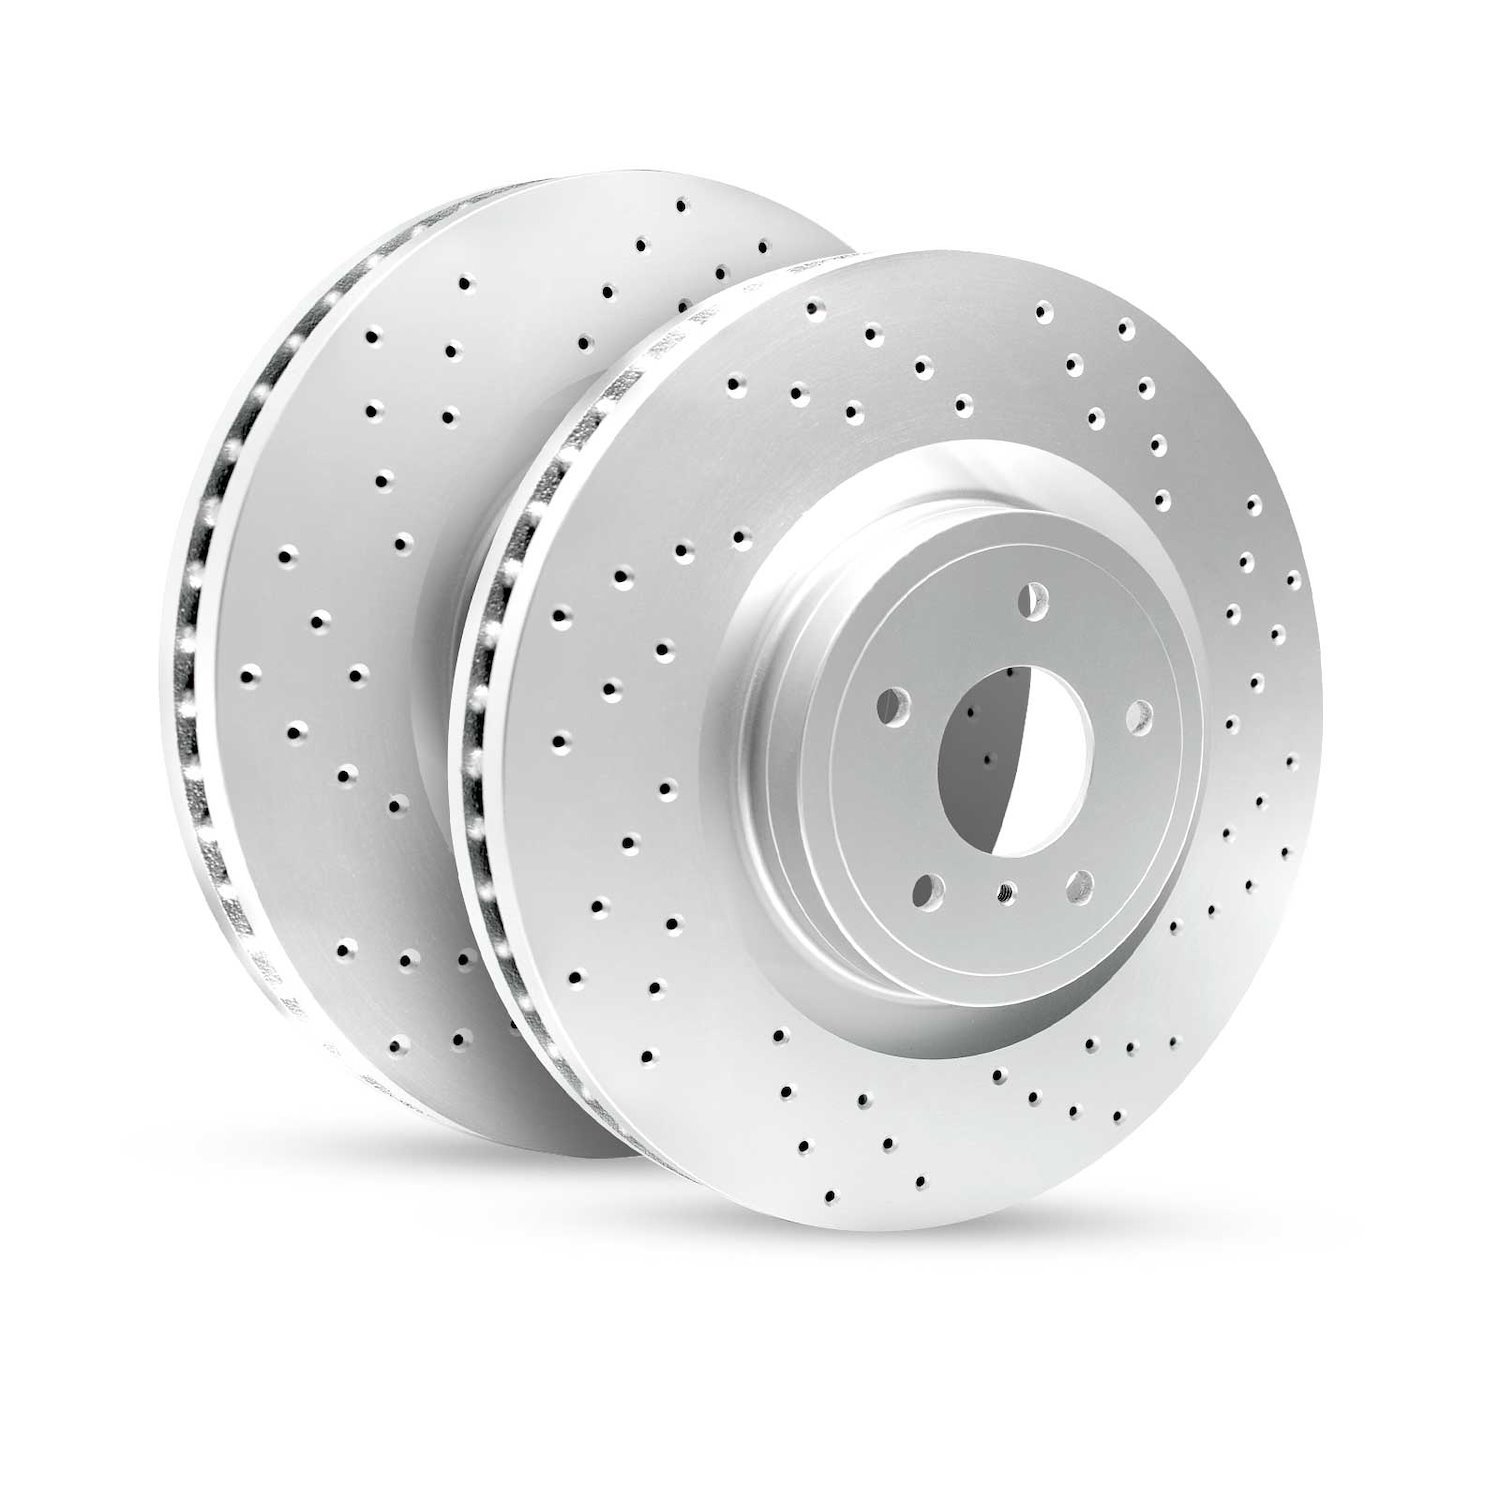 GEO-Carbon Drilled & Slotted Brake Rotor Set, Fits Select Fits Multiple Makes/Models, Position: Rear